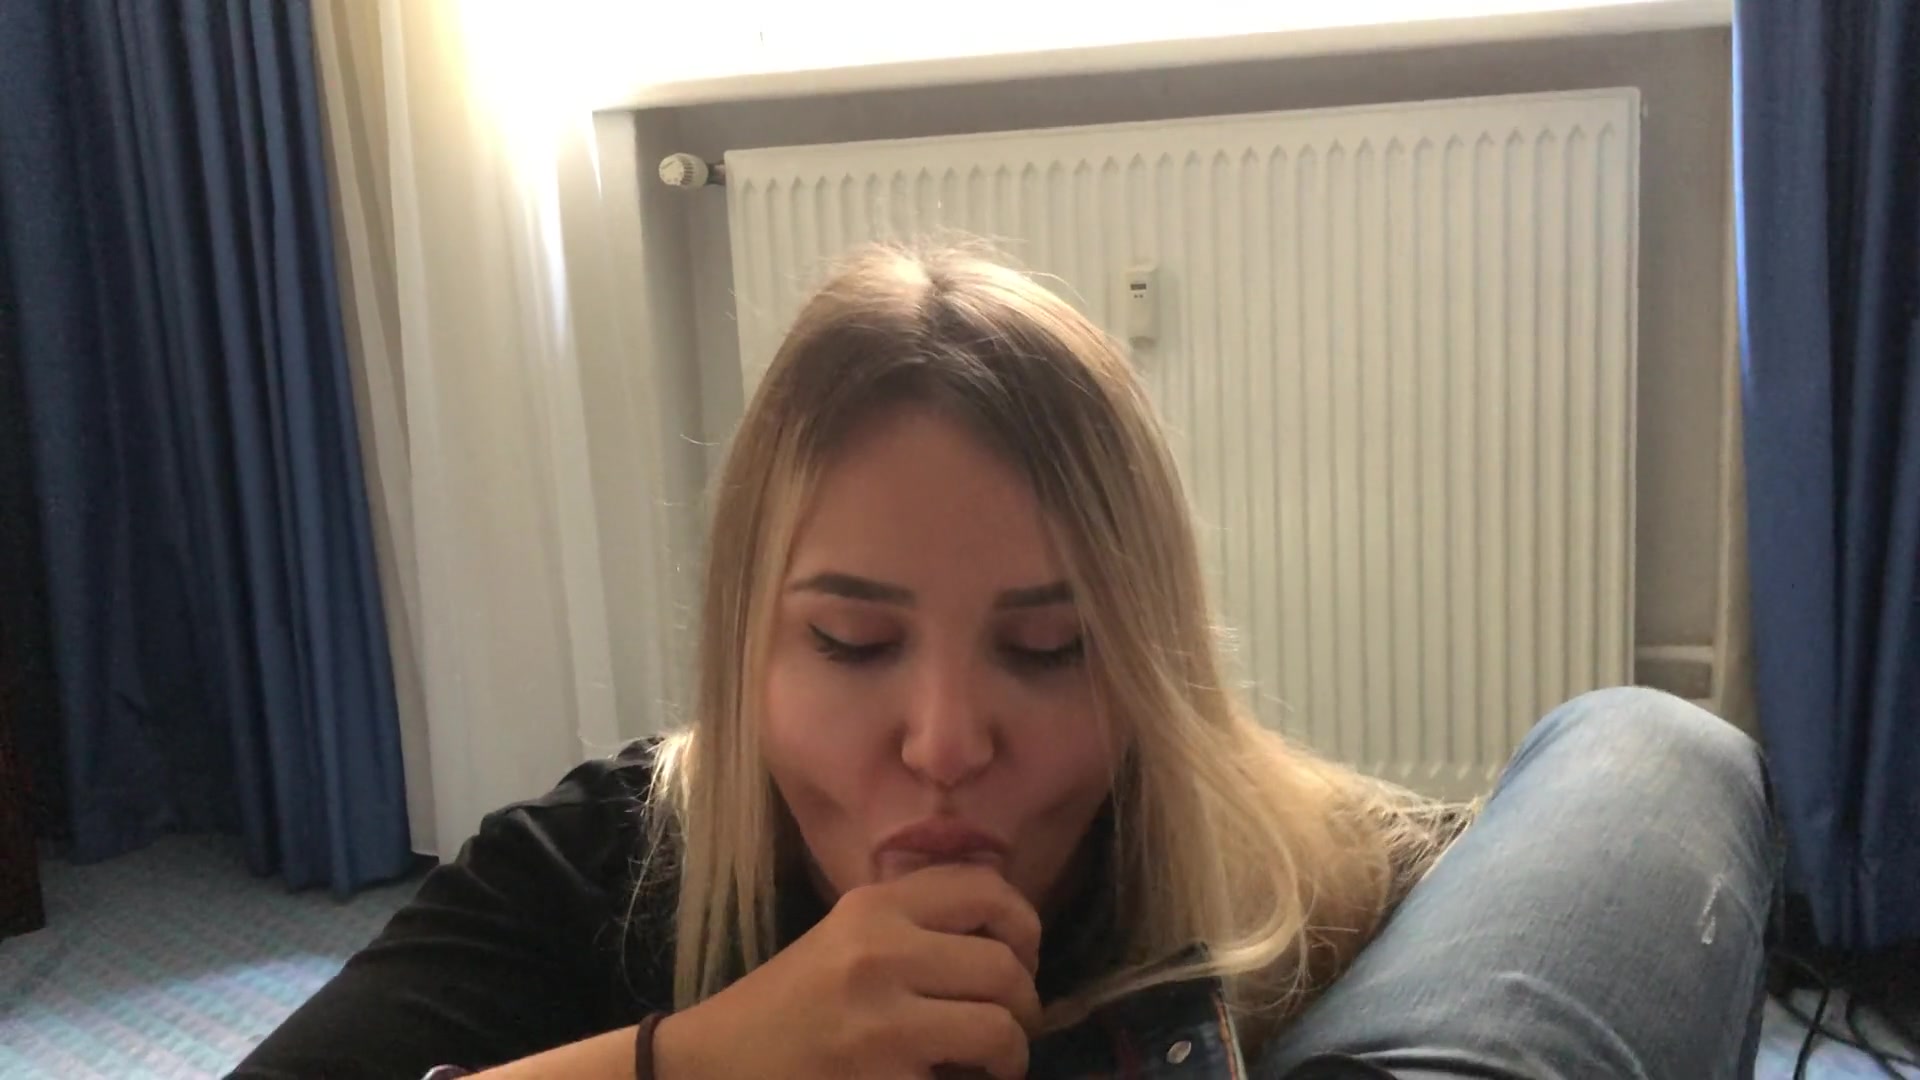 MaryCandy – BABY FACE TEEN BLOWJOB AND EAT SOME CUM